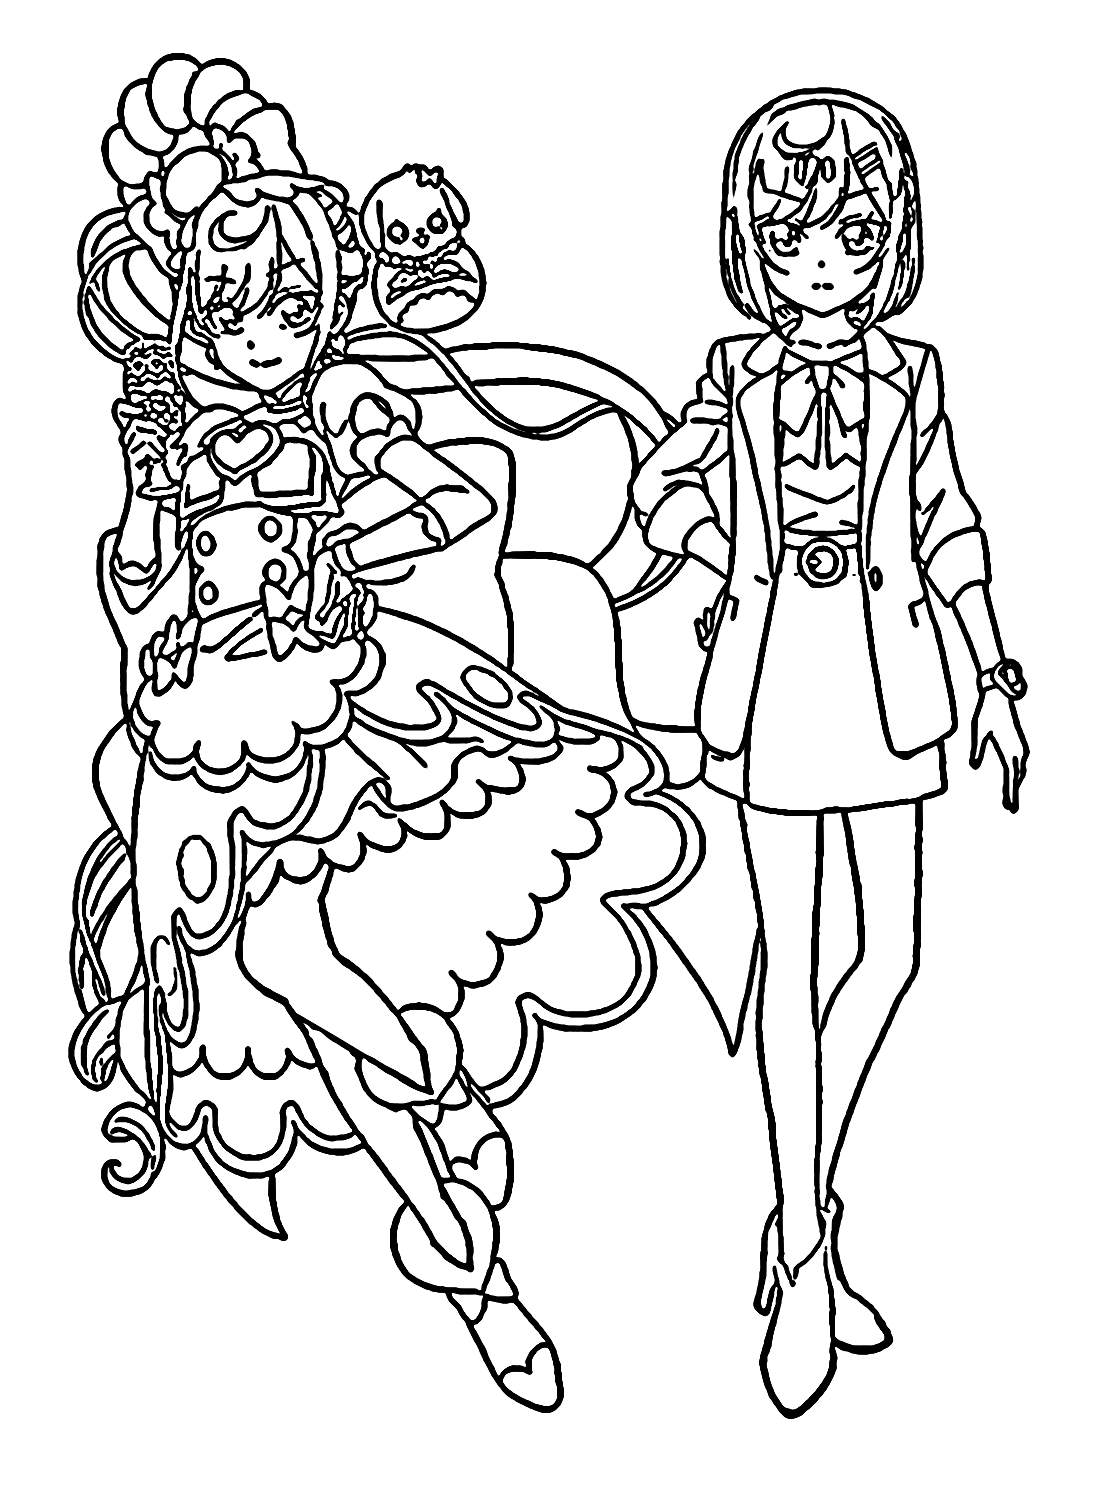 Cure Spicy with Fuwa Kokone Coloring Page